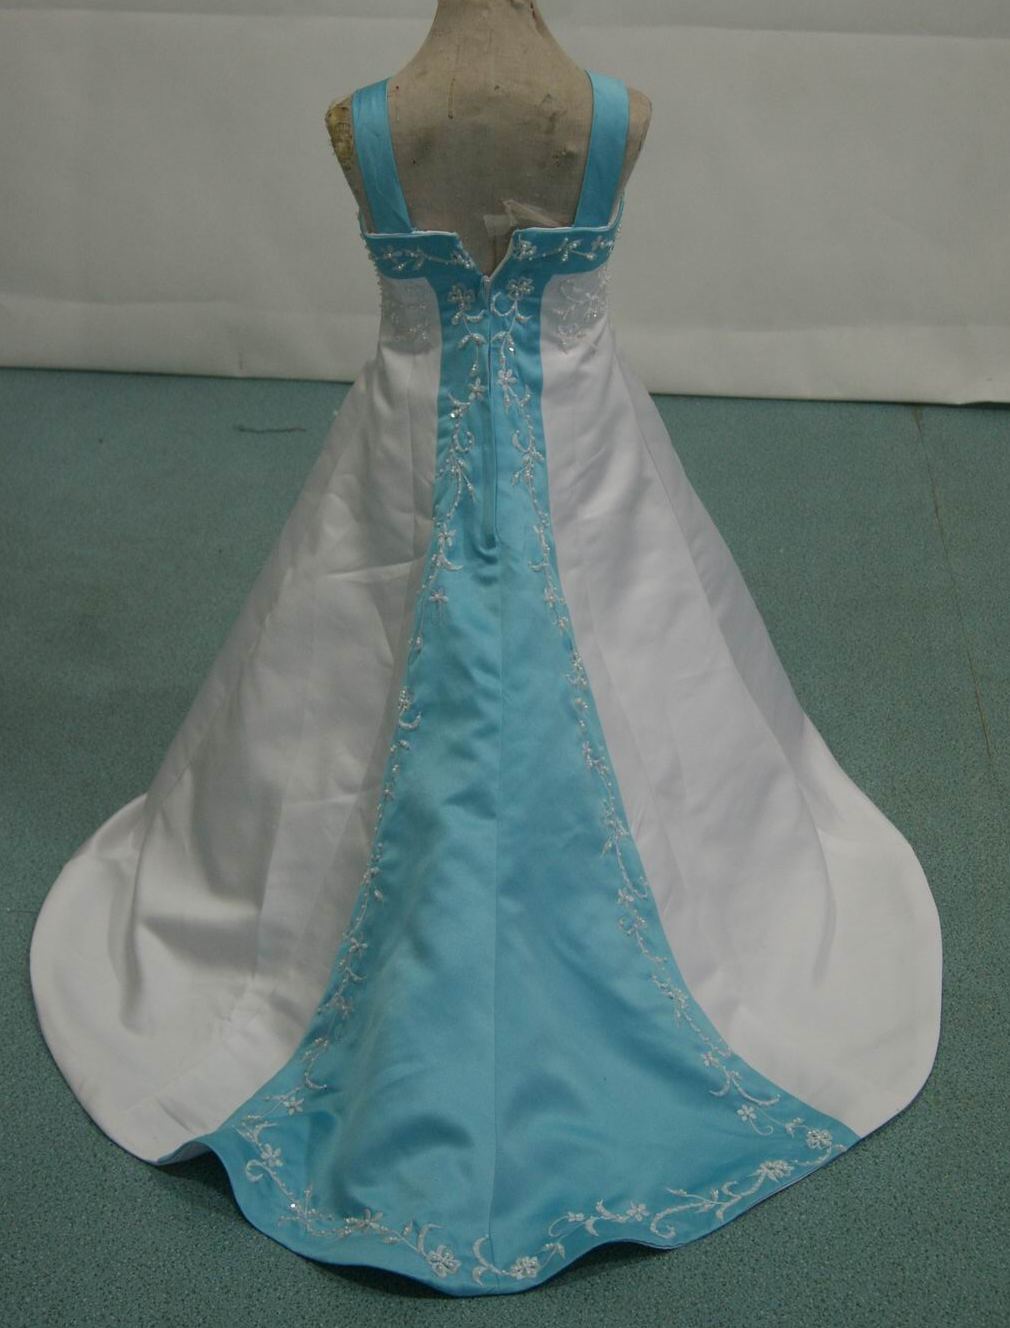 miniature bridal gown in white and pool blue